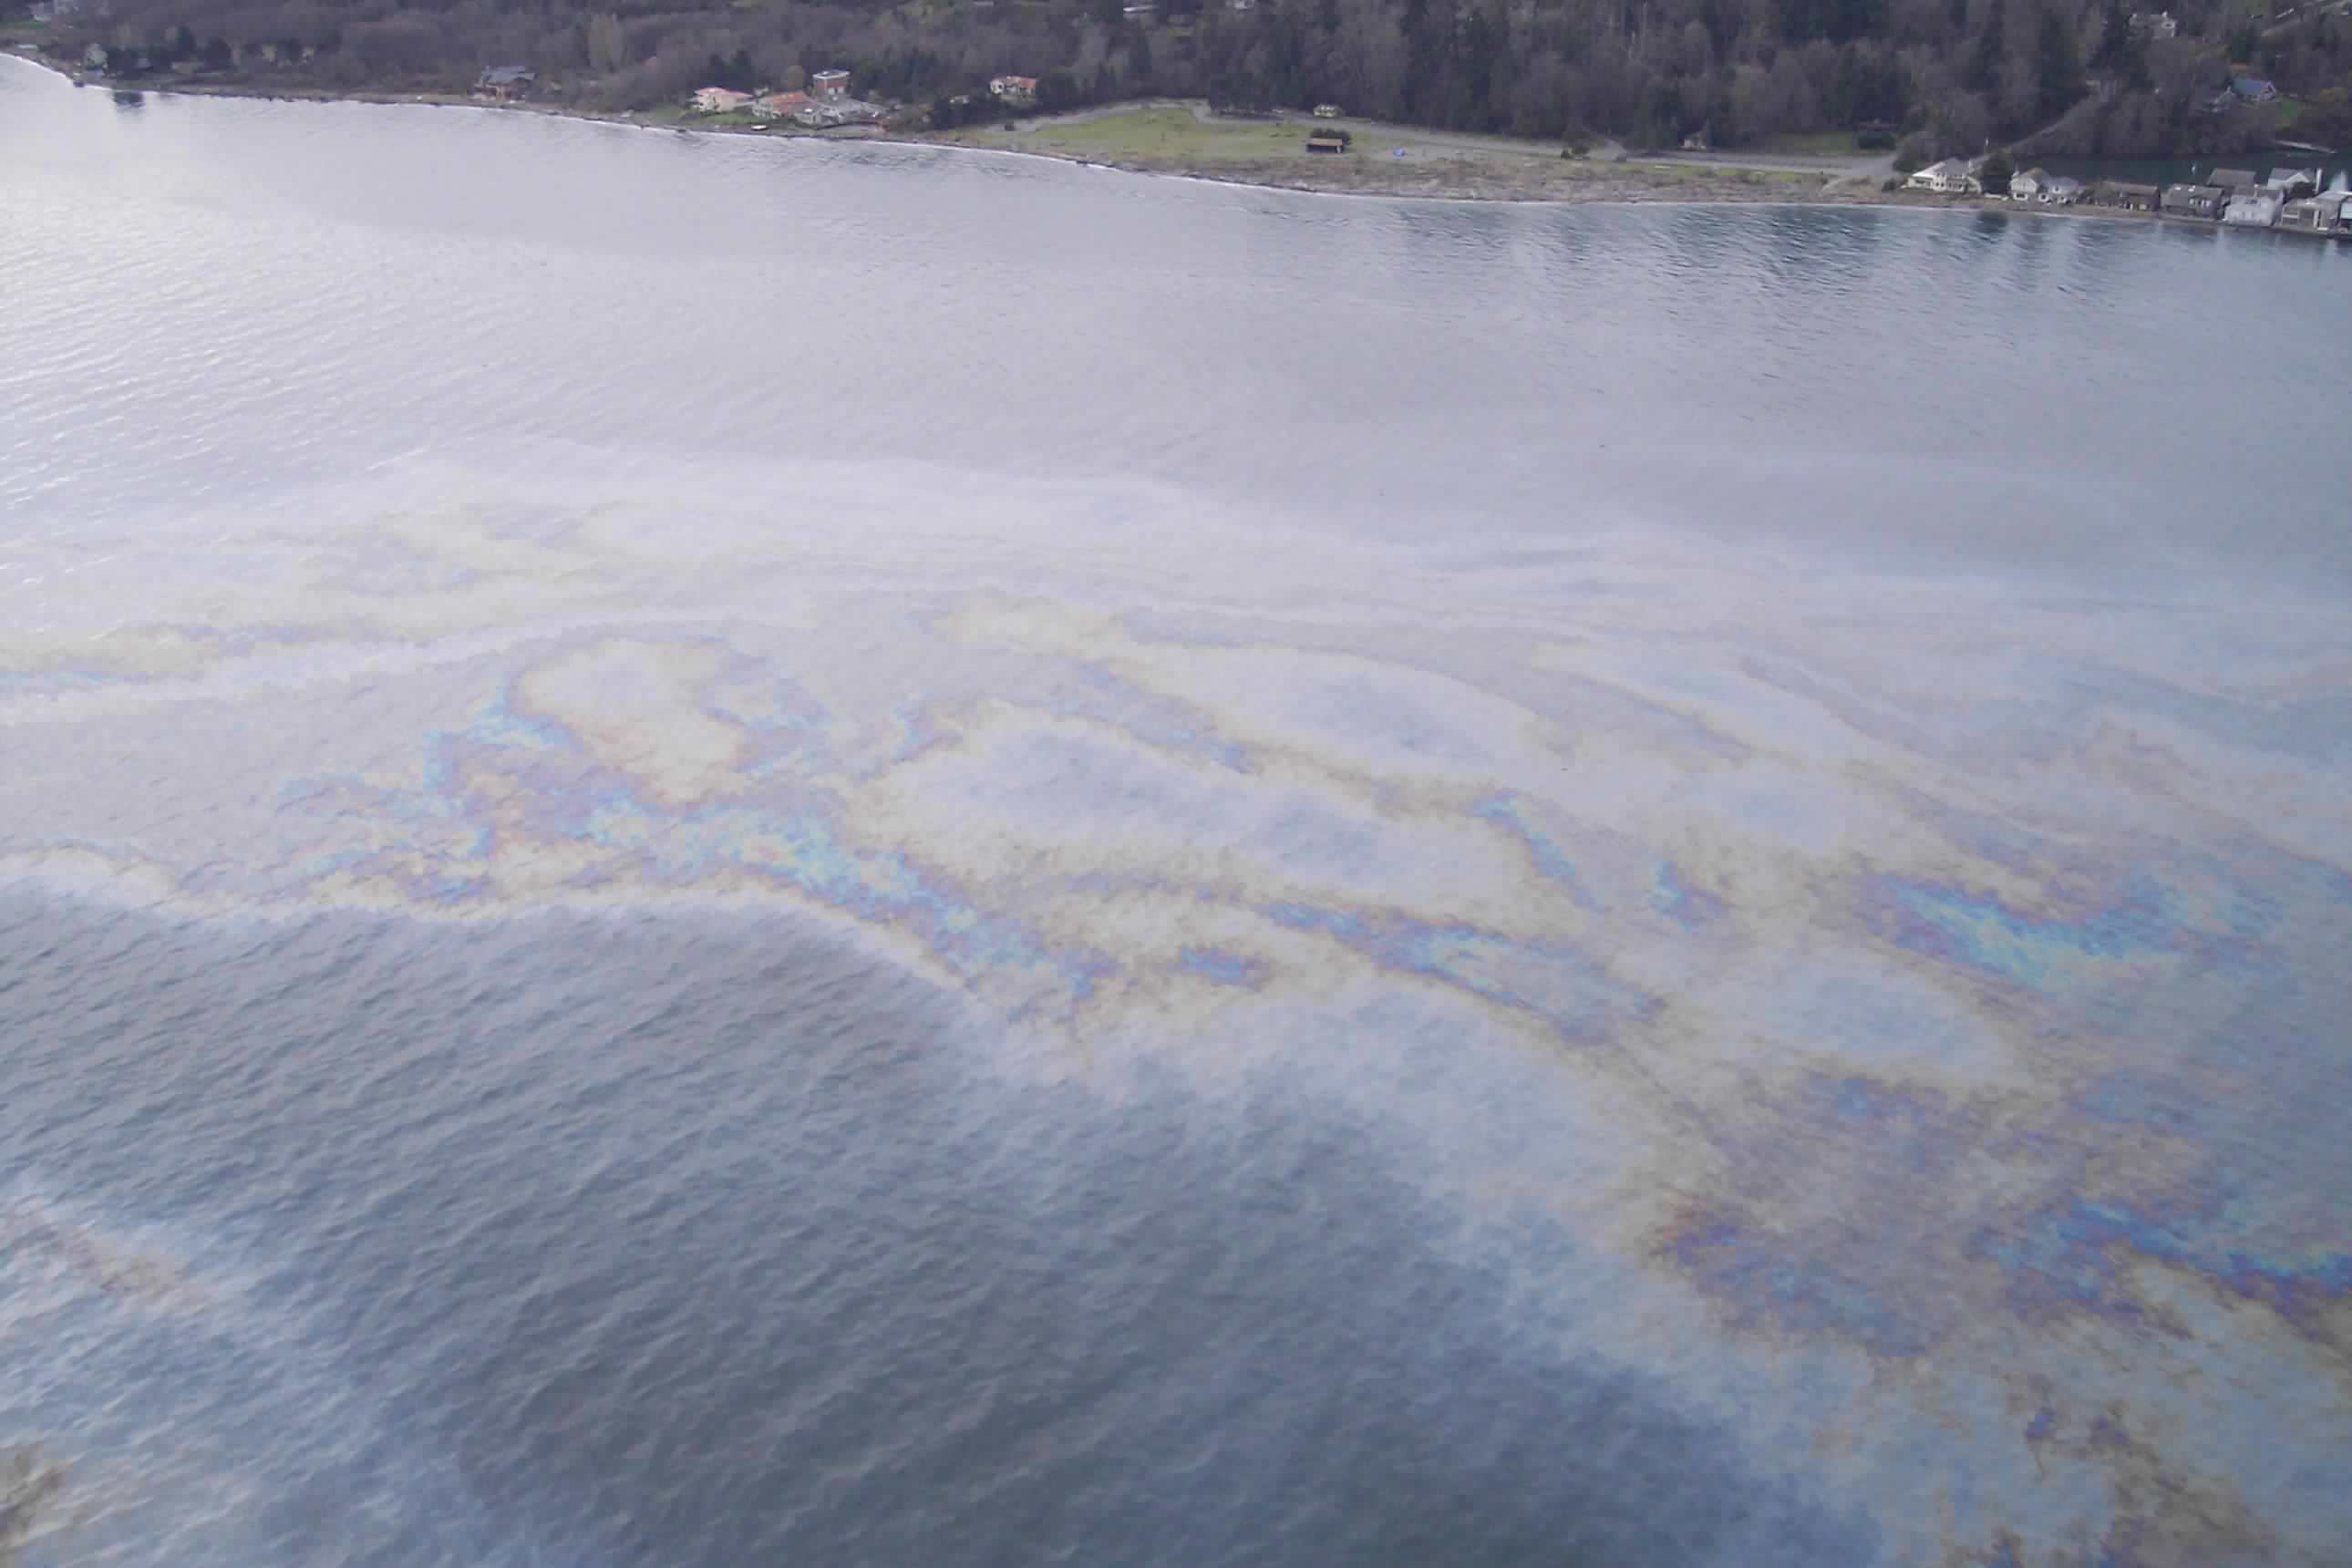 Aerial image of oil spread on a large body of water, the shore in the background.